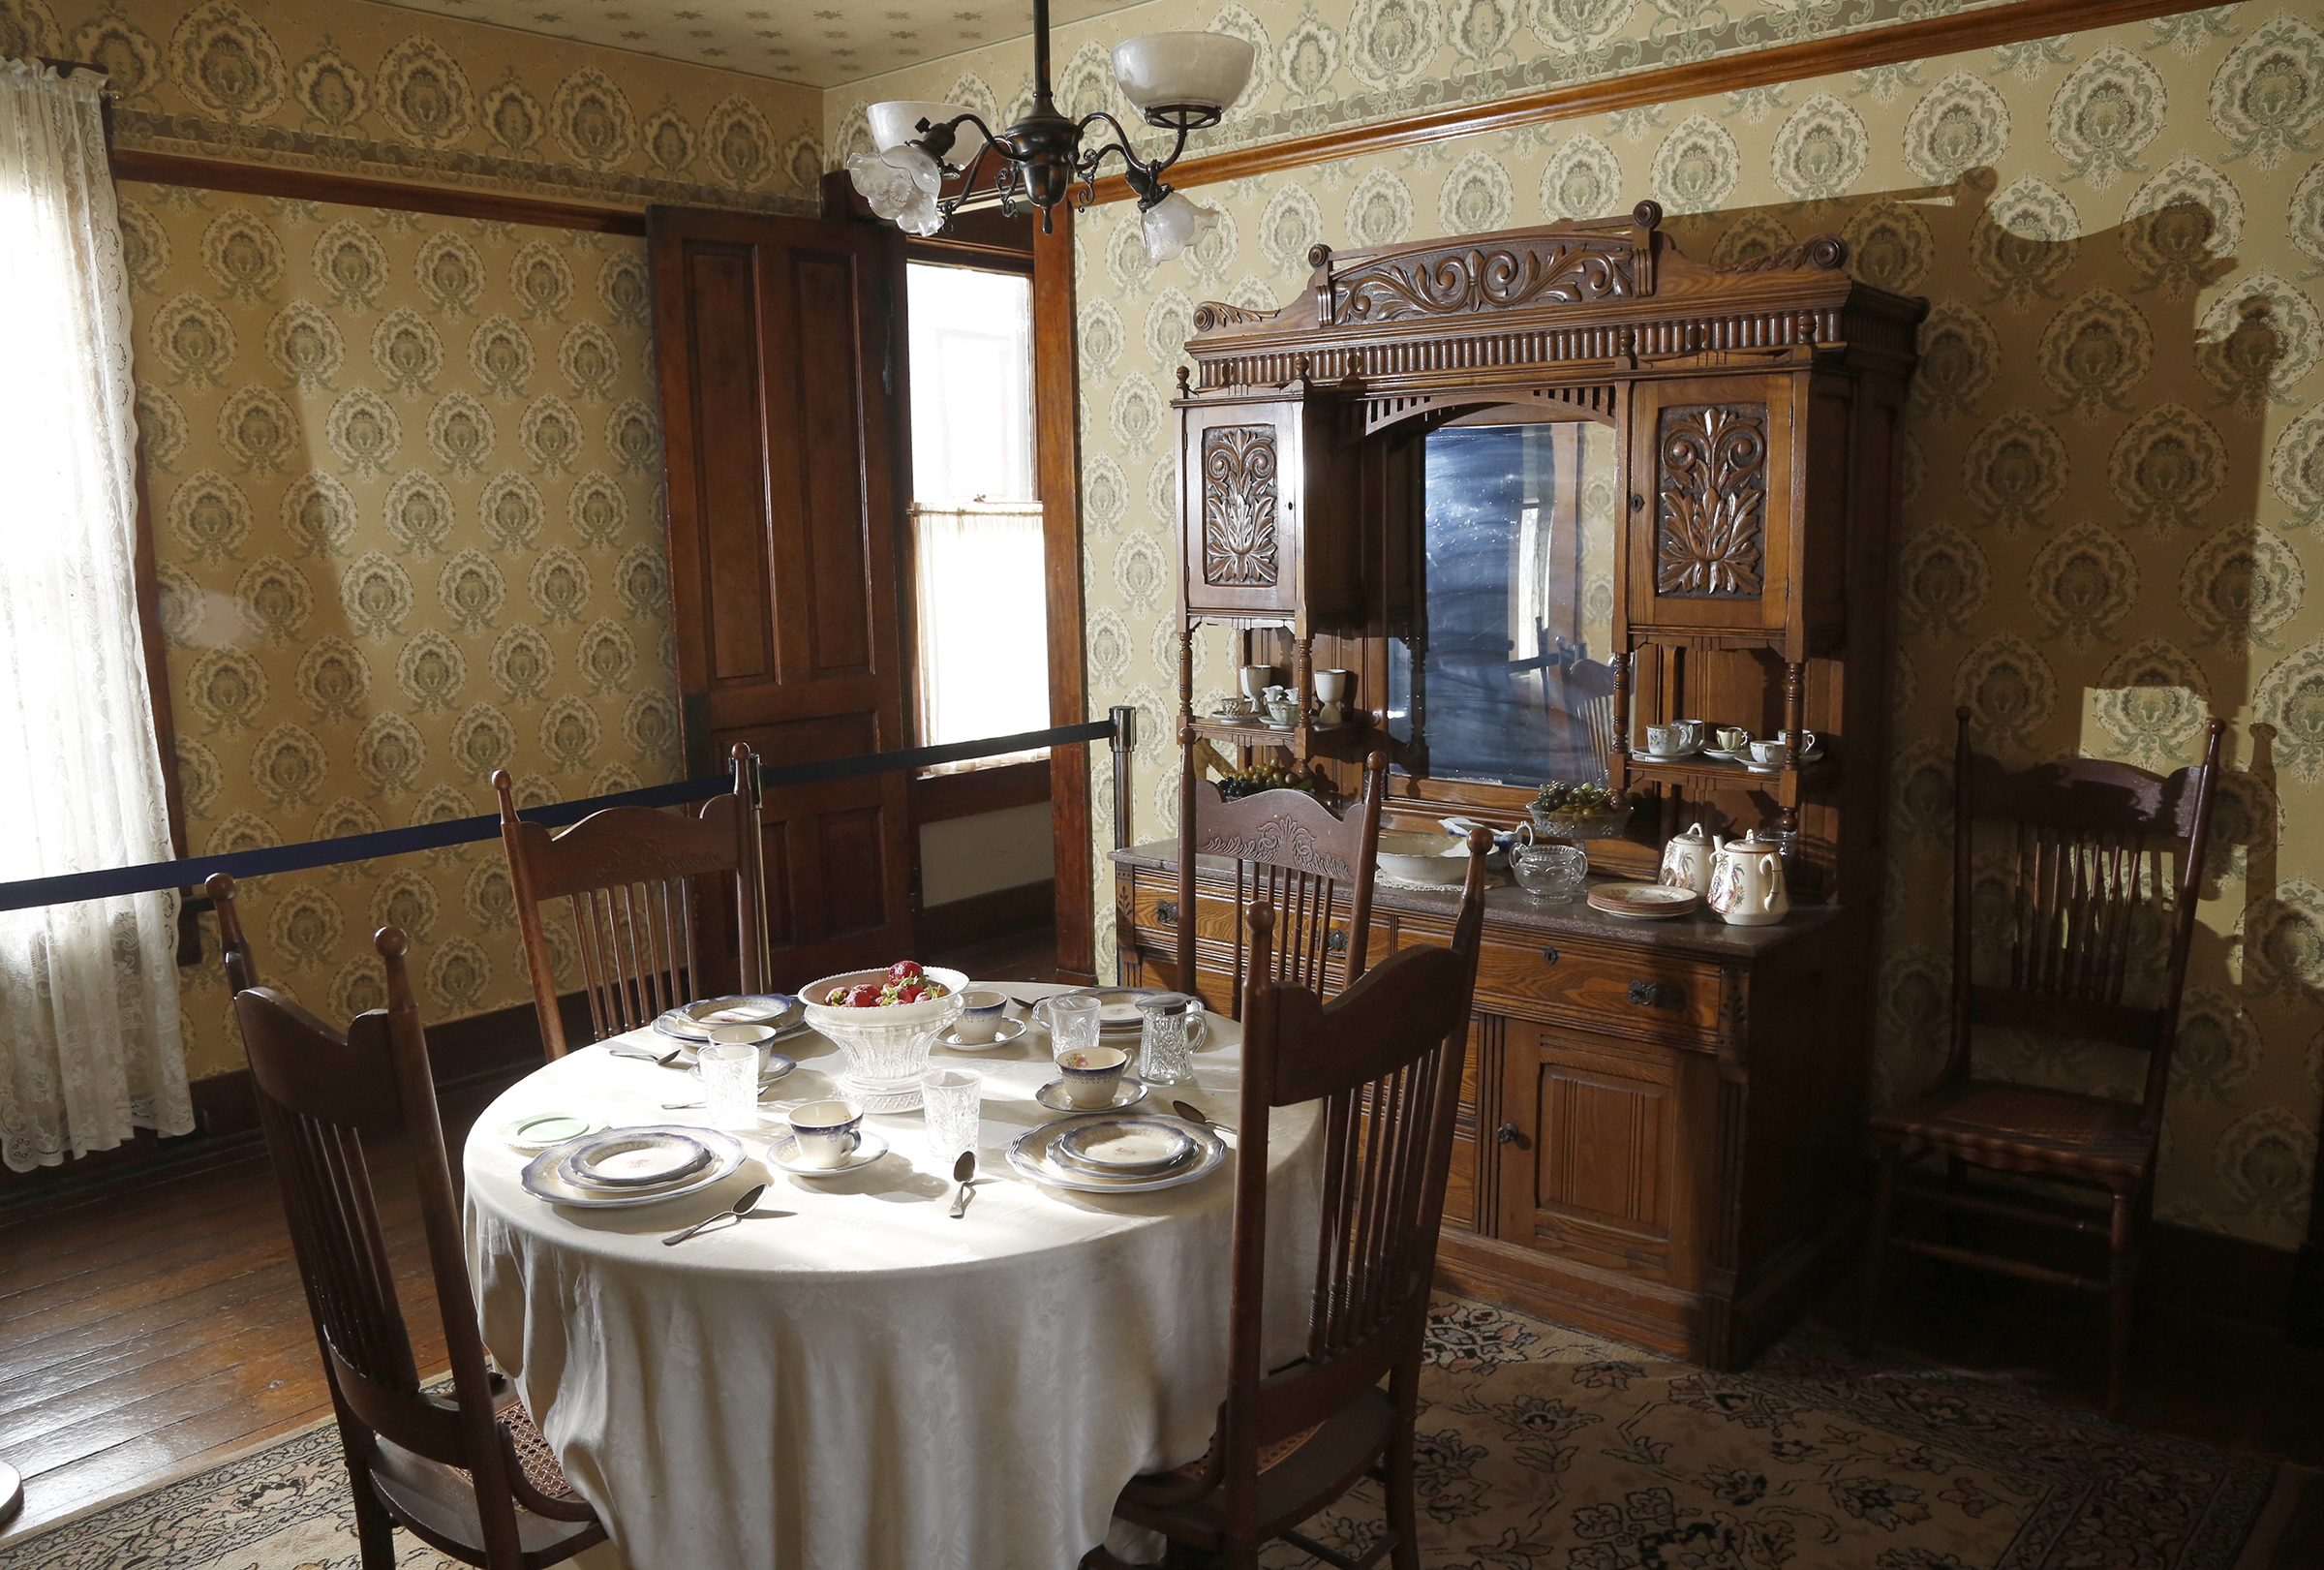 The hutch in the dining room of the Paul Laurence Dunbar house could move away from the wall and the bed folded up in the back.  LISA POWELL / STAFF